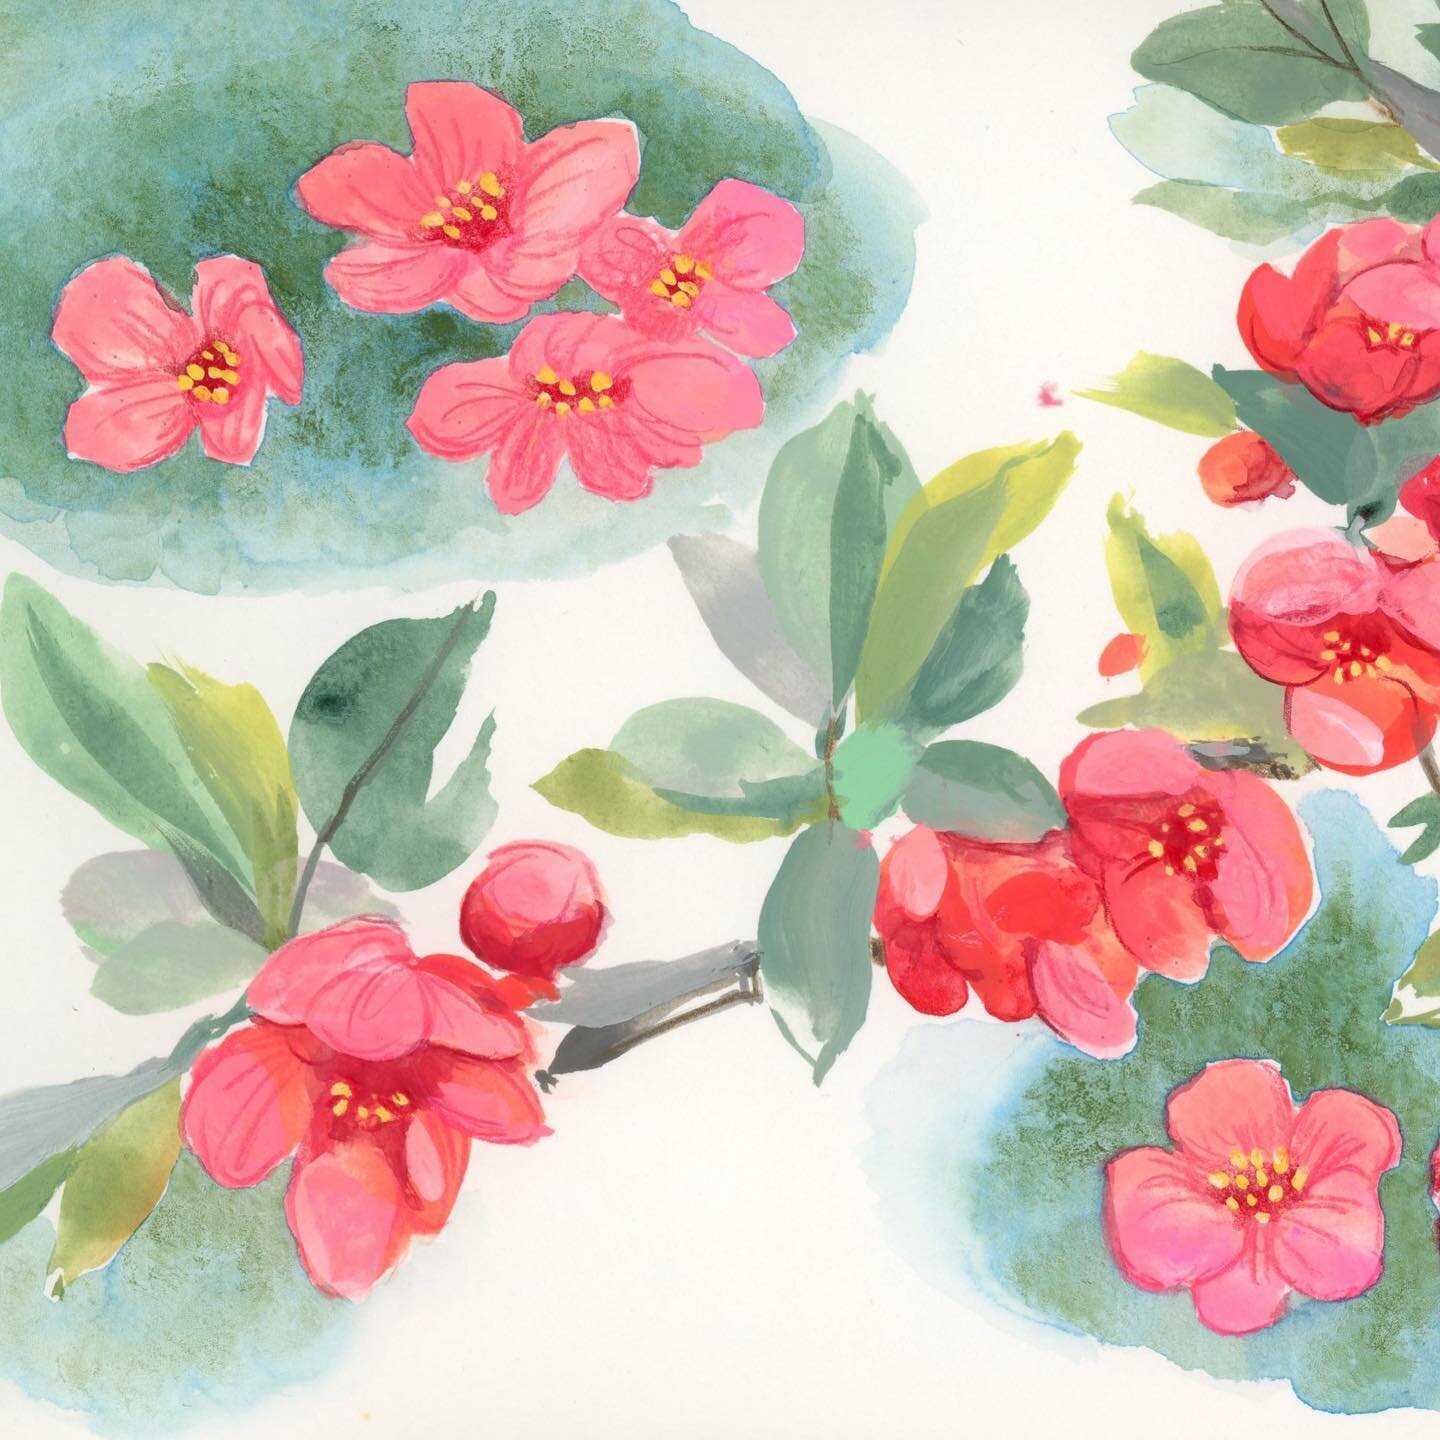 Spring is in the air for a little while anyway 🌸
.
.
.
#watercolor #watercolorillustration #botanicalart #botanicalillustration #acrylagouache #acrylagouacheillustration #watercolorpencil #illustration #illustrator #illustratorforhire #surfacepatter